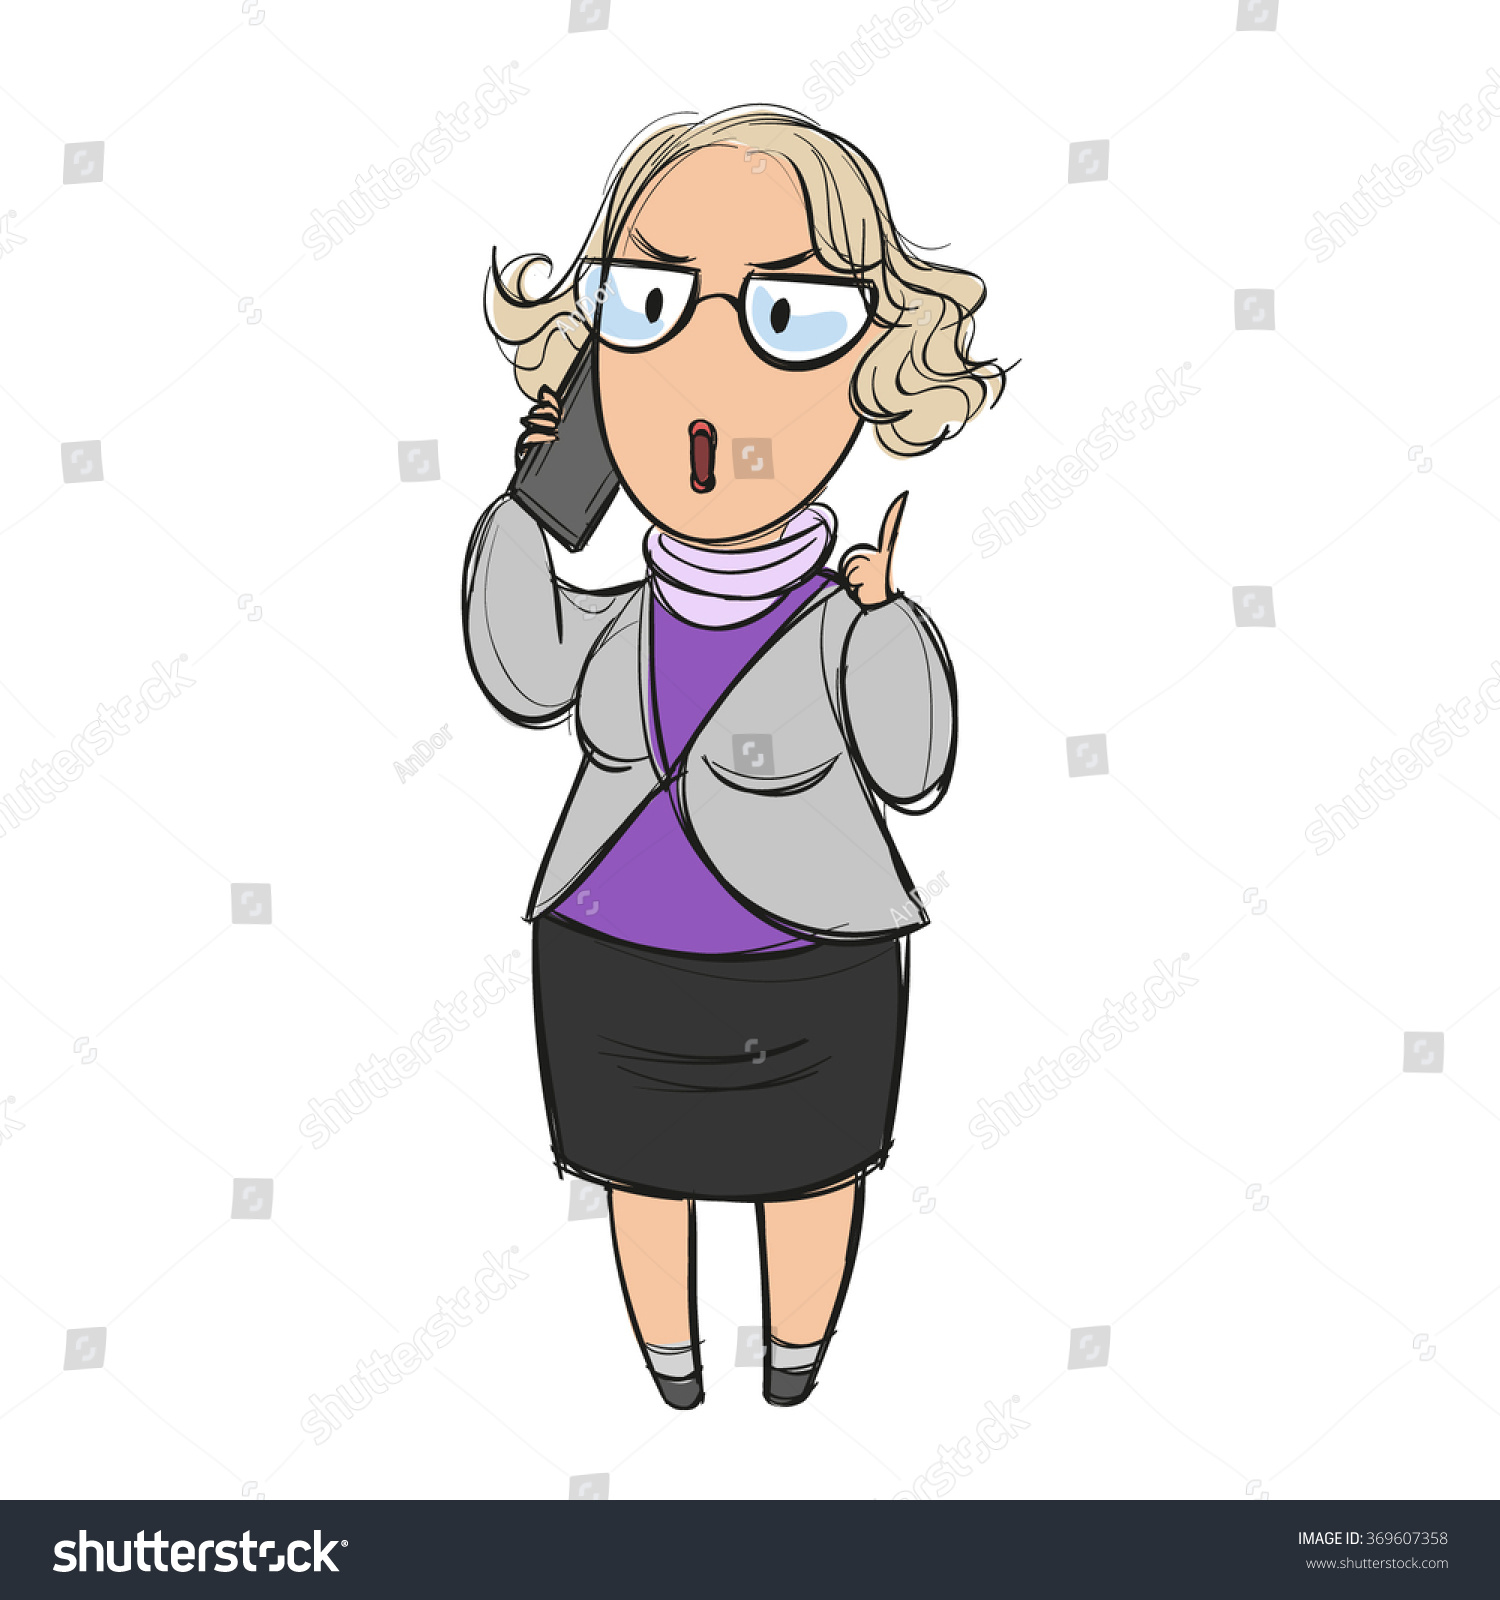 woman on phone clipart - photo #14